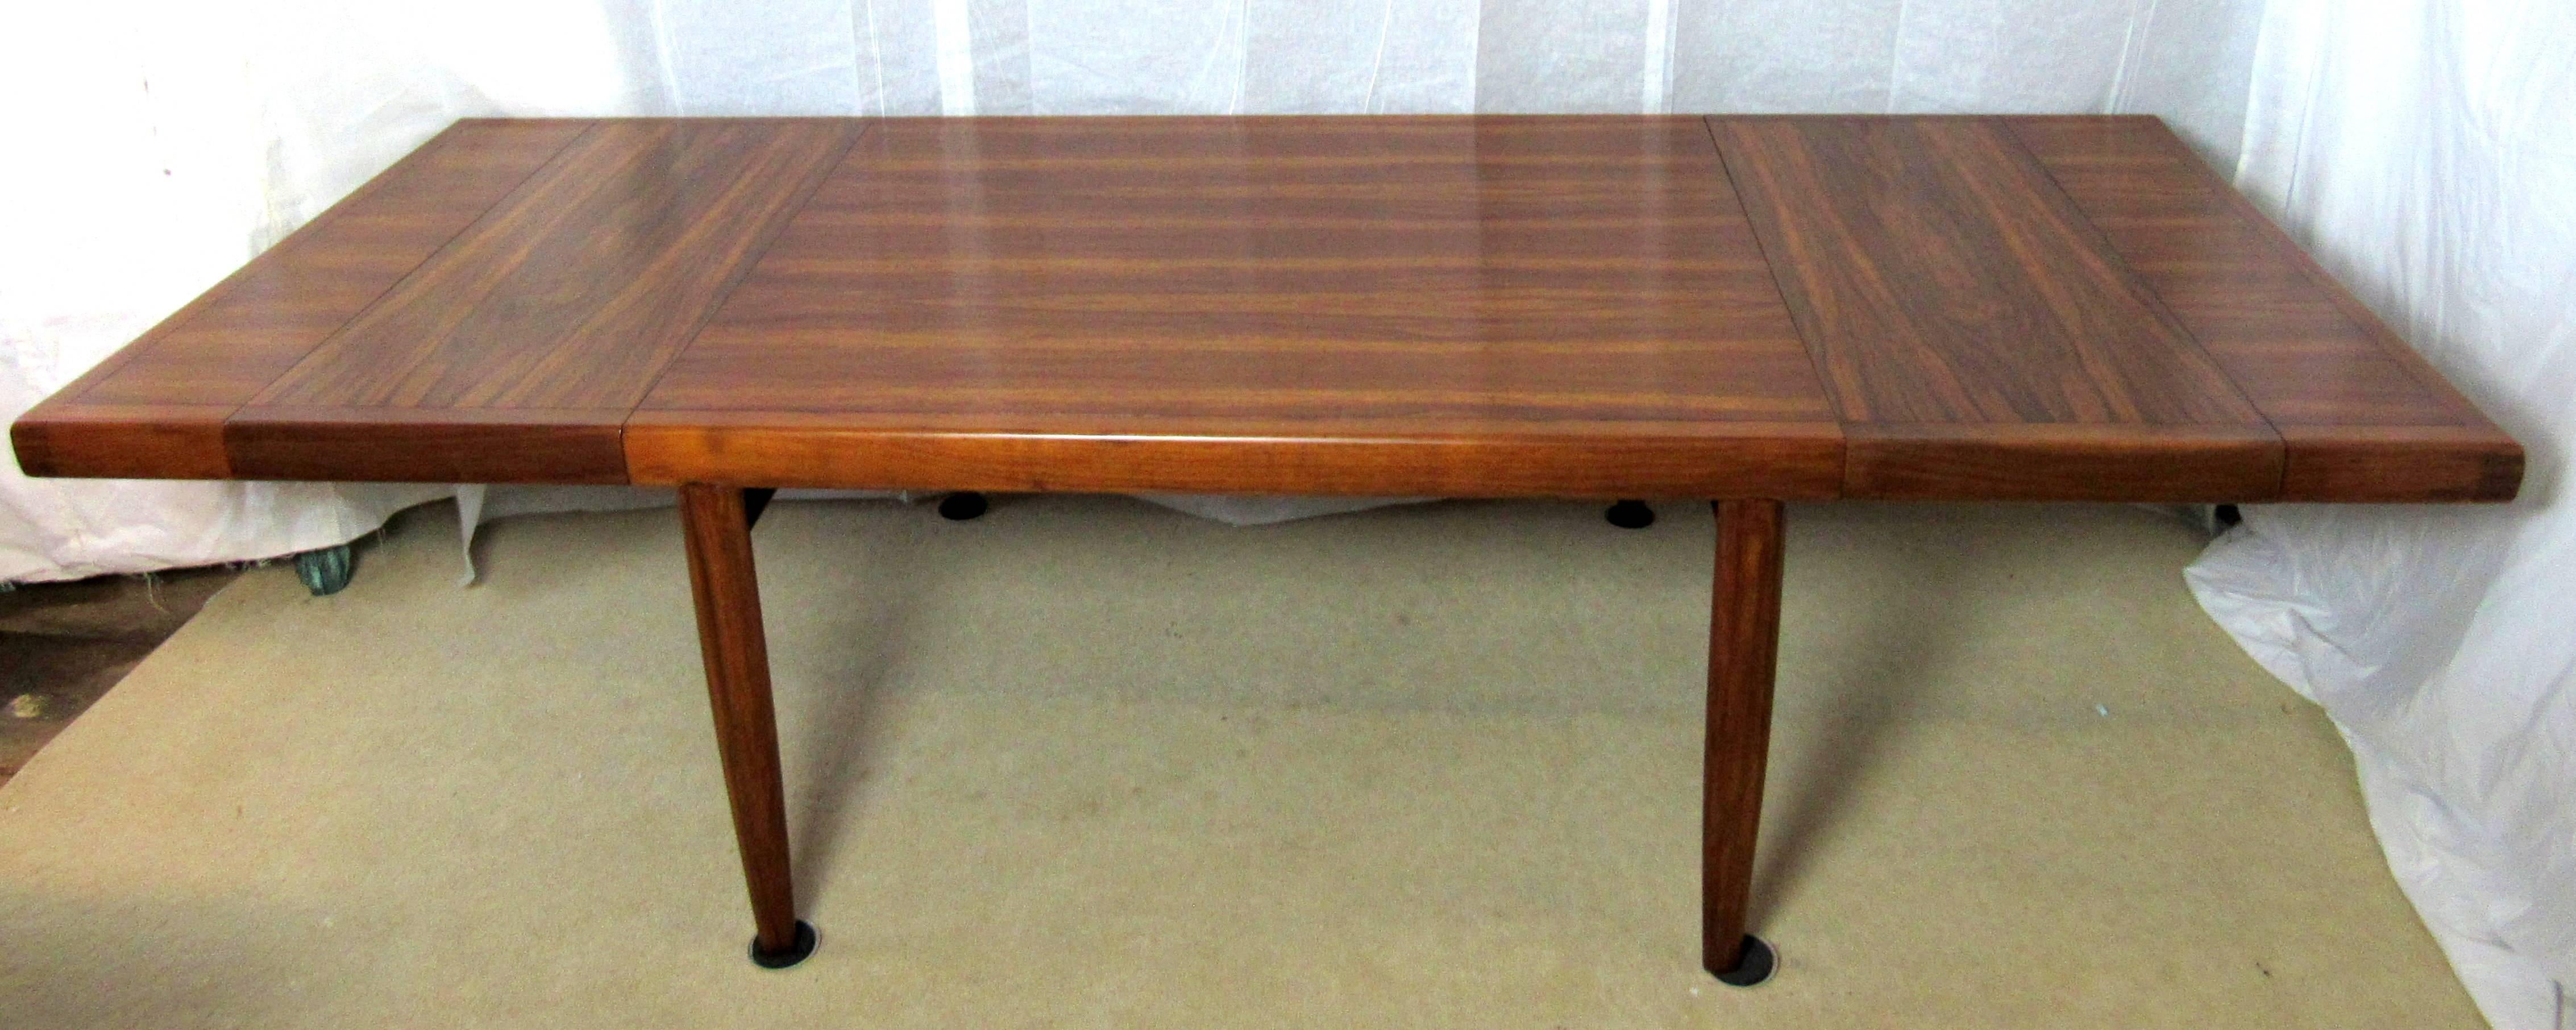 Mid-Century Modern Refractory Dining Table by George Nakashima for Widdicomb 1960